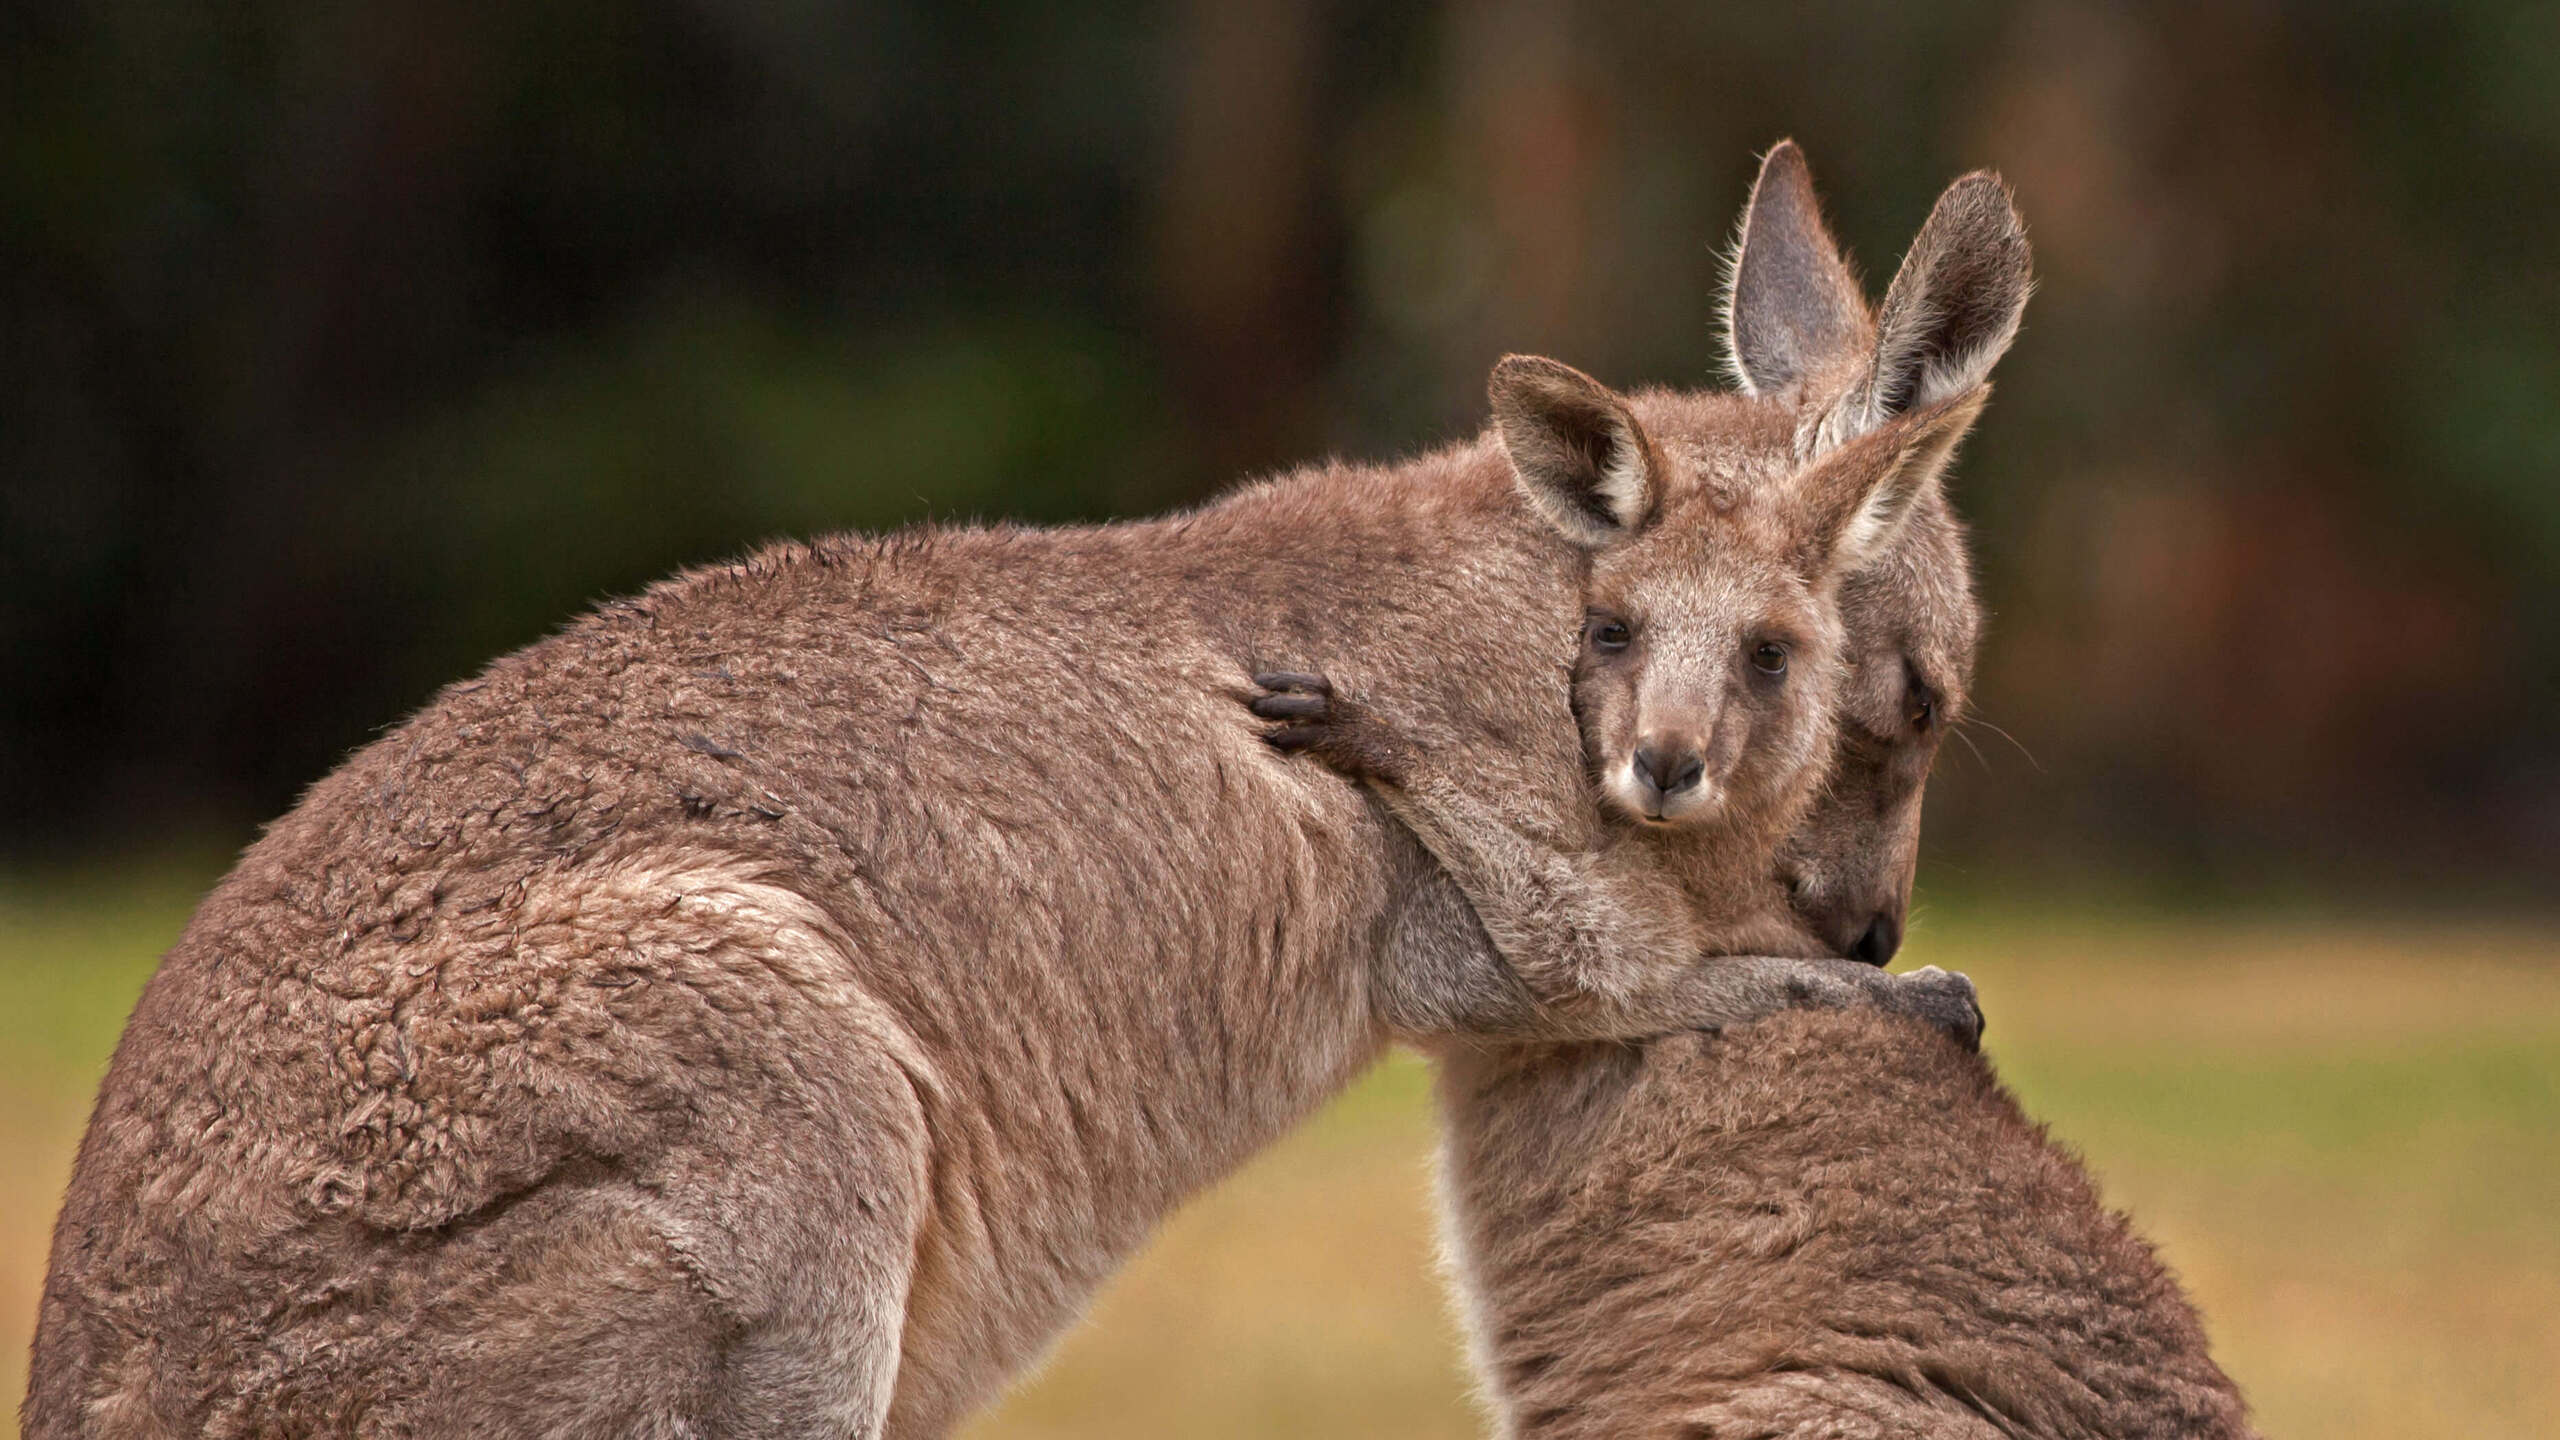 Nothing like a kangaroo cuddle to brighten up your day 🦘 by Belle Ciezak